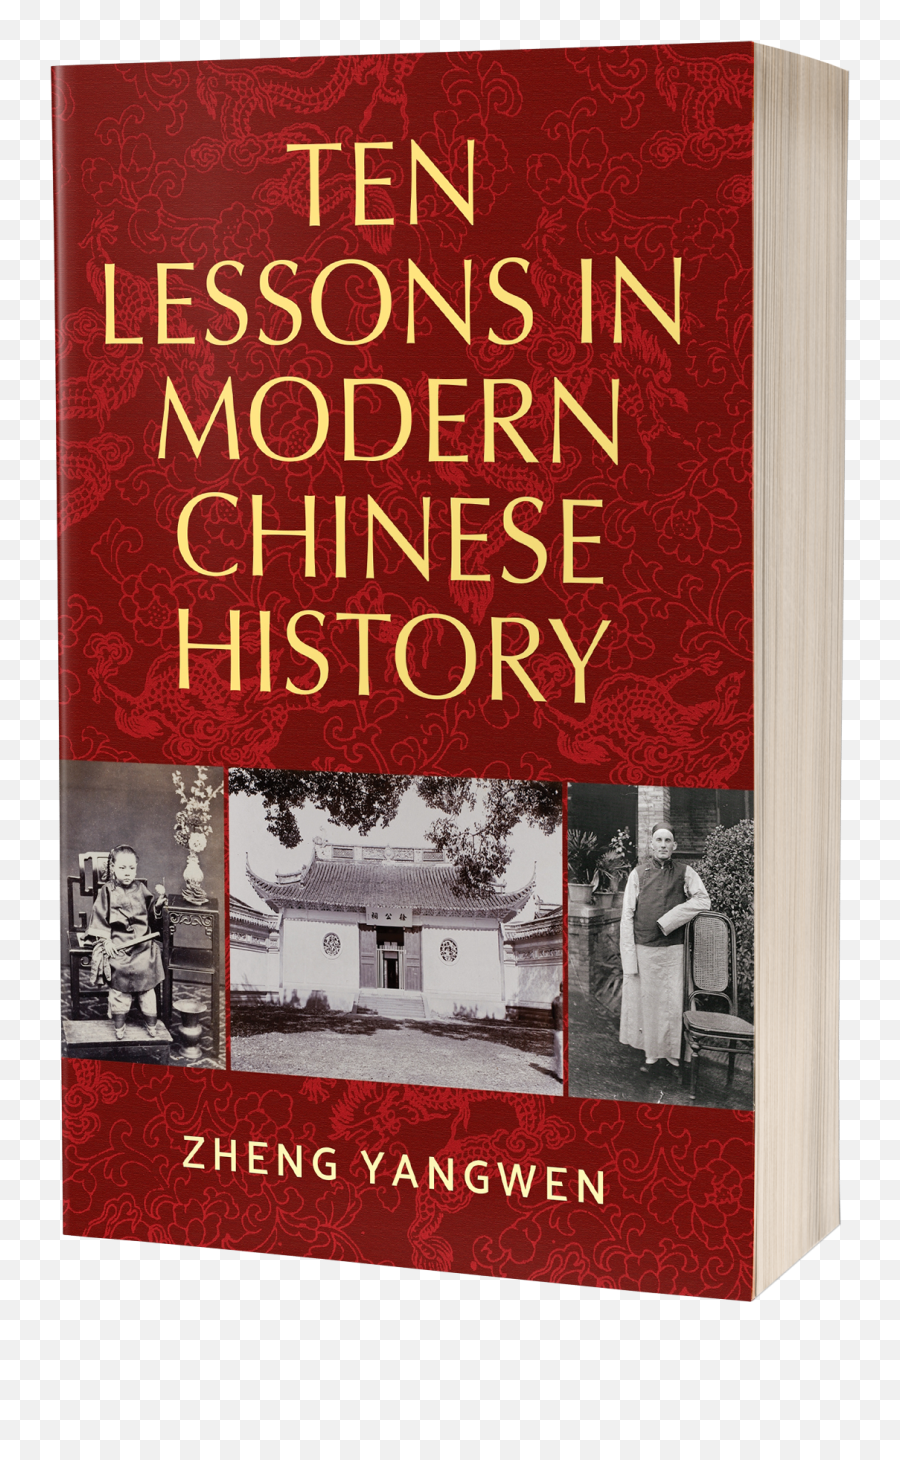 Ten Lessons In Modern Chinese History - Book Cover Chinese History Emoji,Secret Wechat Falling Emoticons Spanish